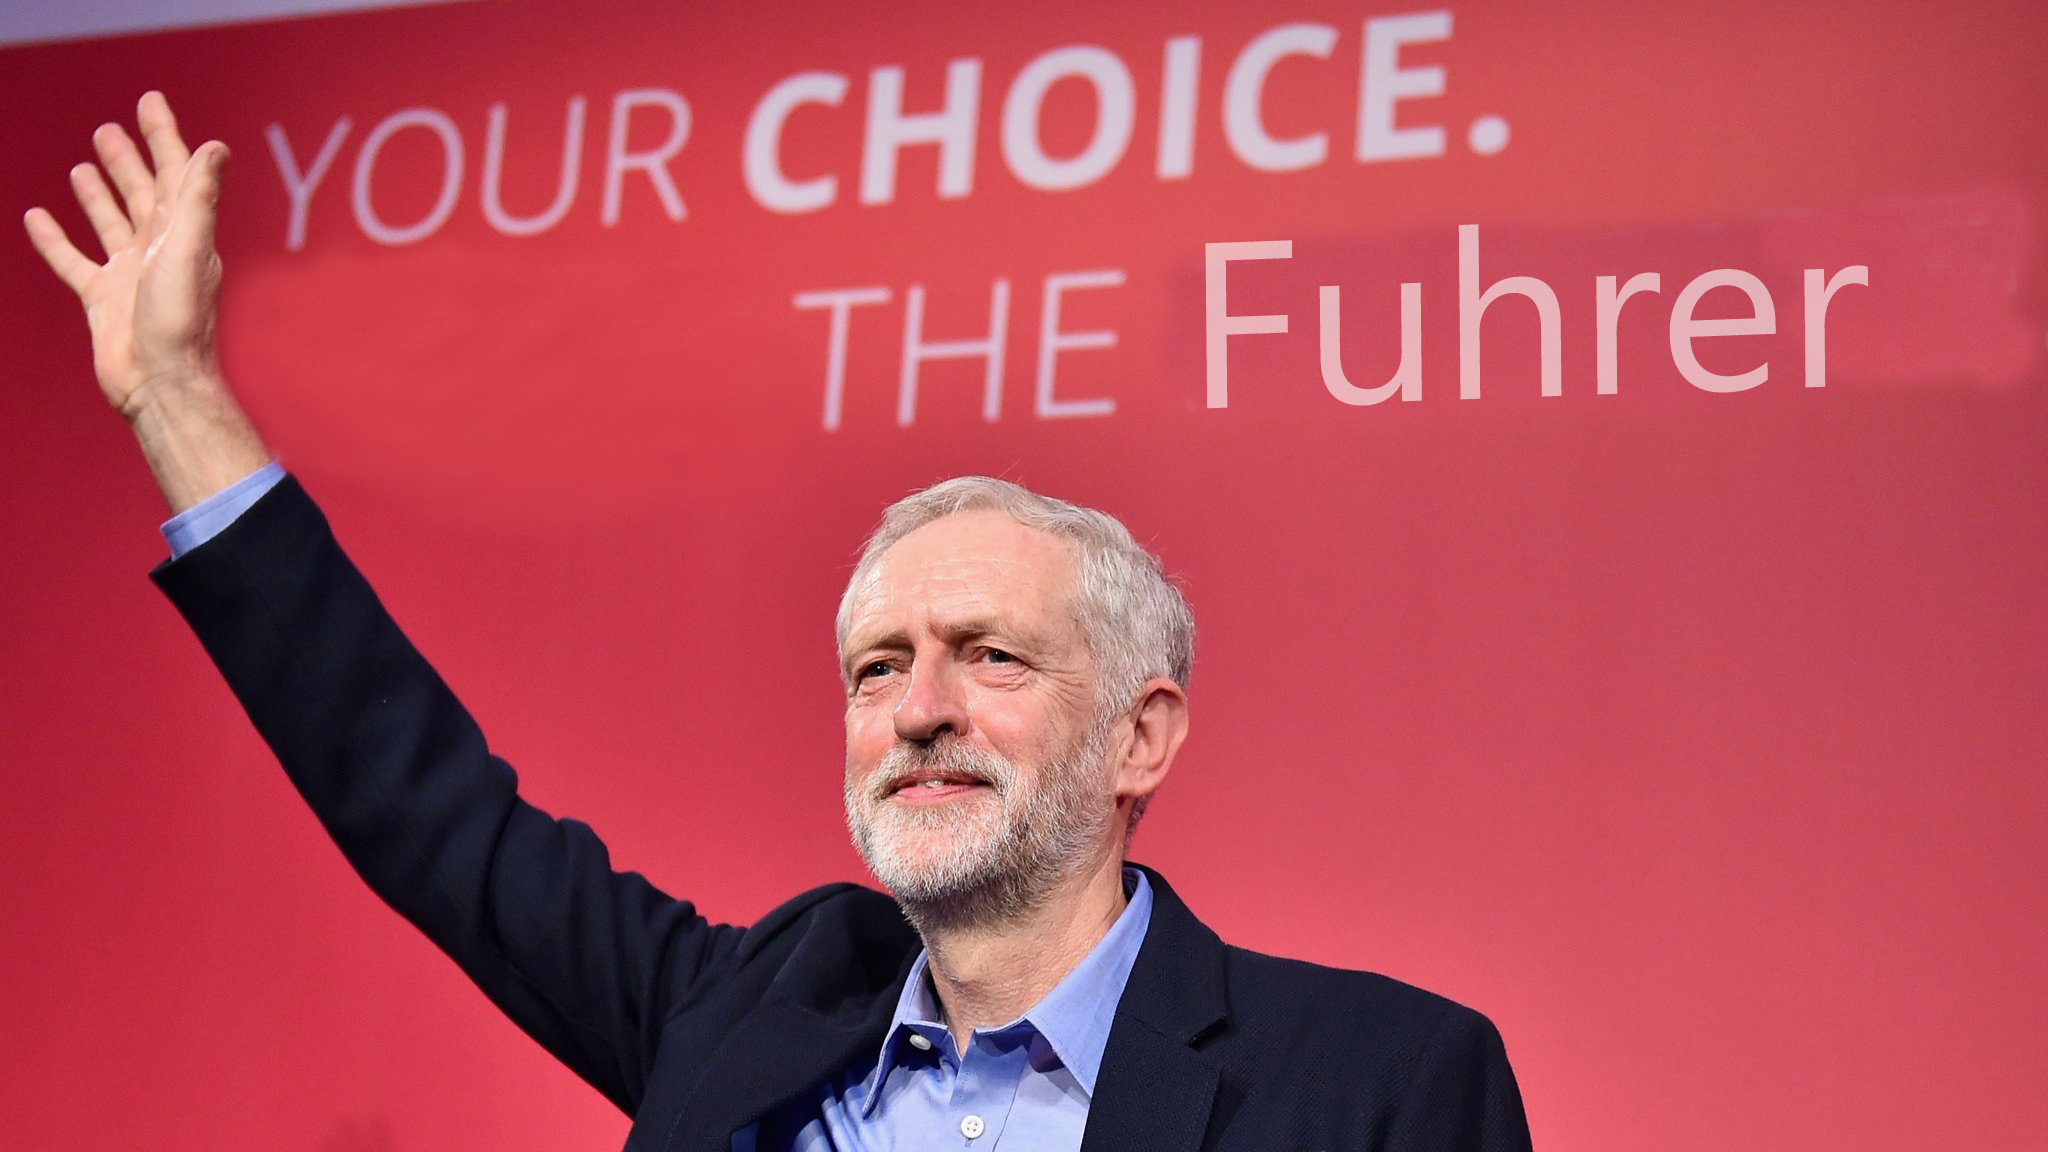 LONDON, ENGLAND - SEPTEMBER 12: Jeremy Corbyn is announced as the new leader of the Labour Party at the Queen Elizabeth II conference centre on September 12, 2015 in London, England. Mr Corbyn was announced as the new Labour leader today following three months of campaigning against fellow candidates ministers Yvette Cooper and Andy Burnham and shadow minister Liz Kendall. The leadership contest comes after Ed Miliband's resignation following the general election defeat in May. (Photo by Jeff J Mitchell/Getty Images)